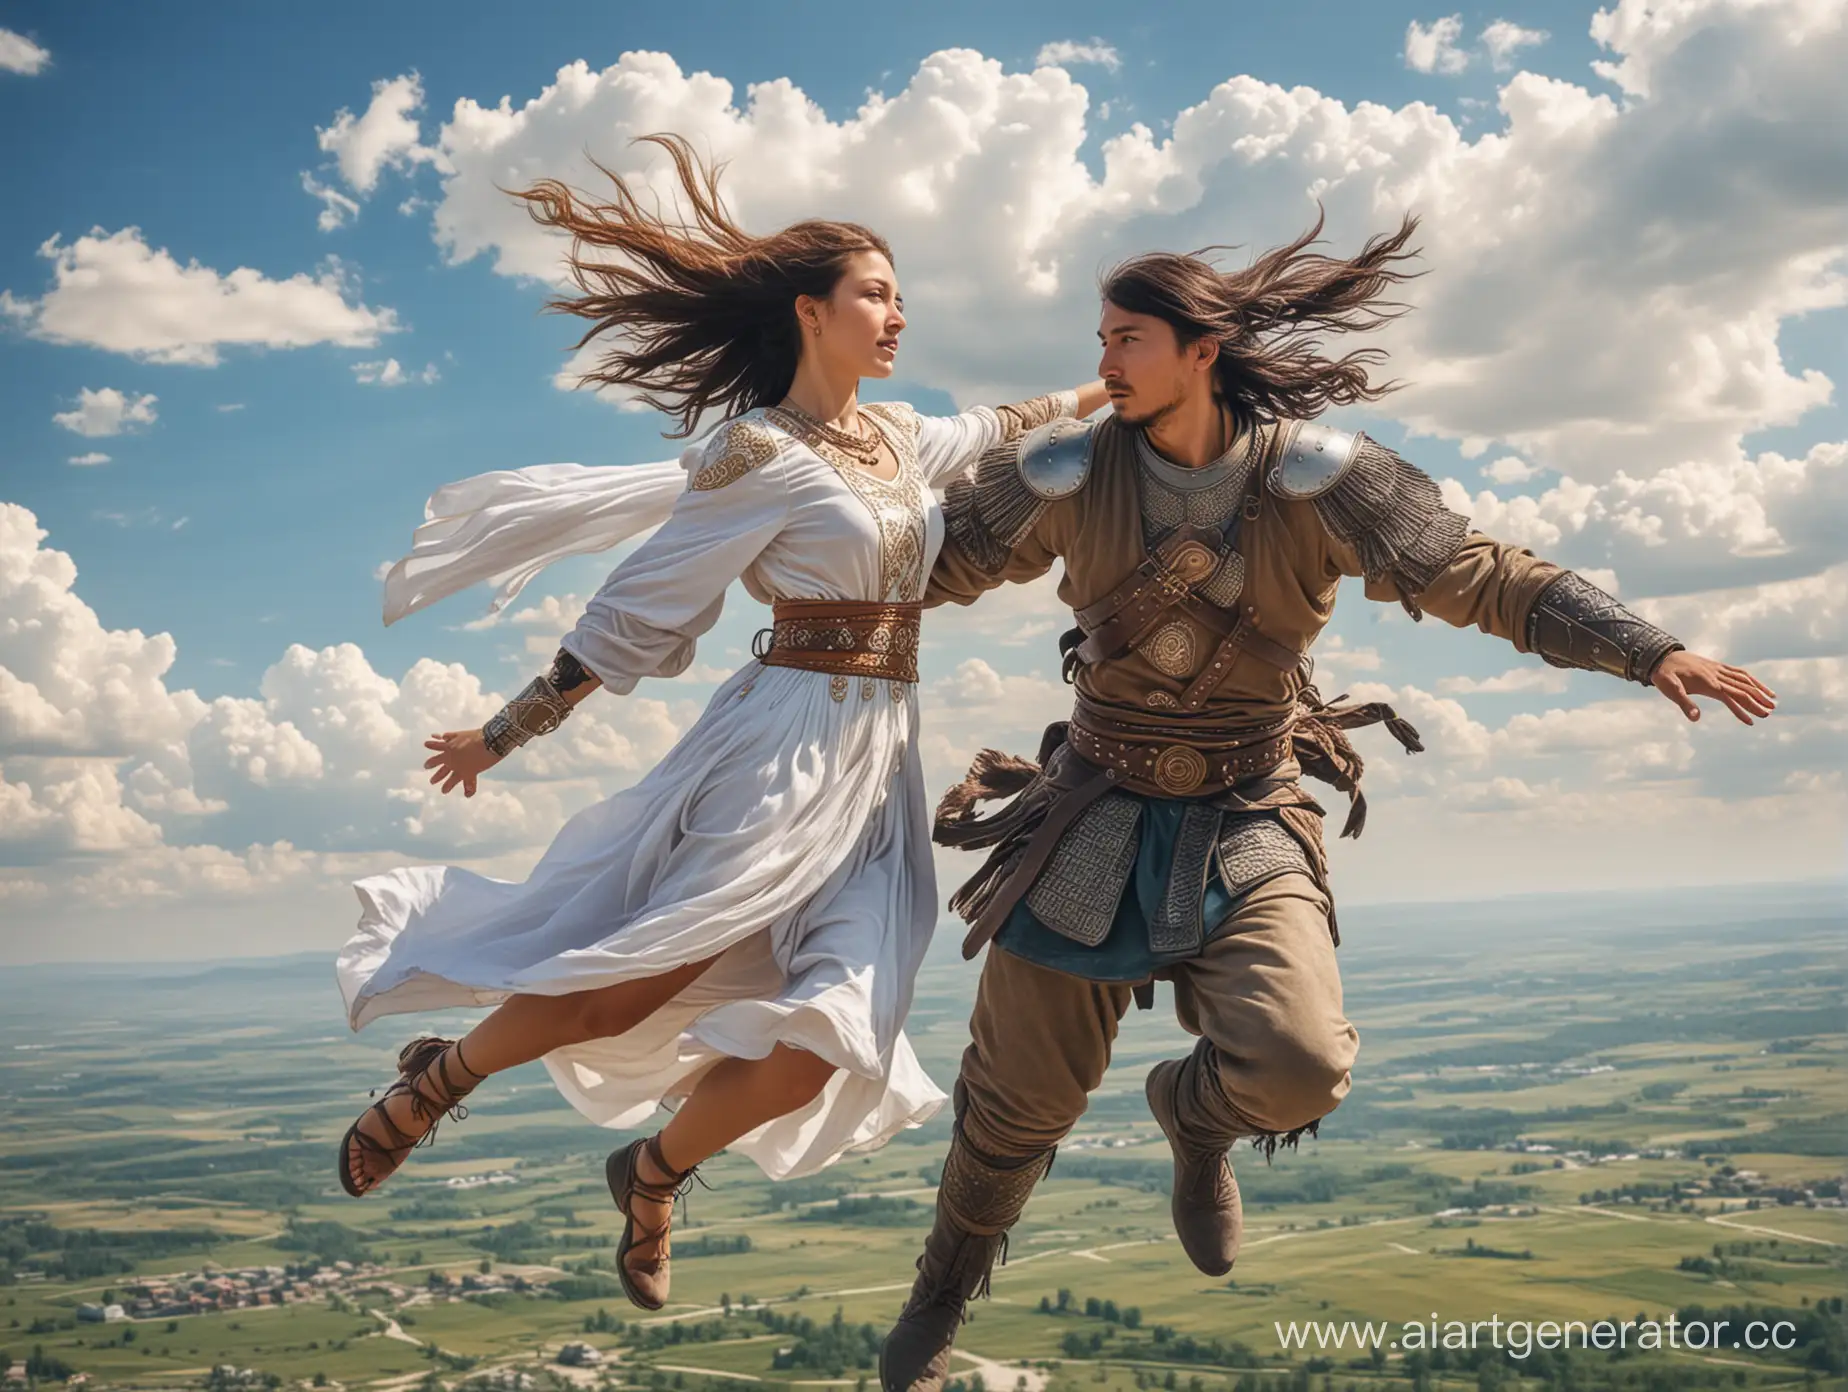 Mordvin-Girl-and-Turkic-Warrior-Soaring-Above-Earth-in-a-Summer-Embrace